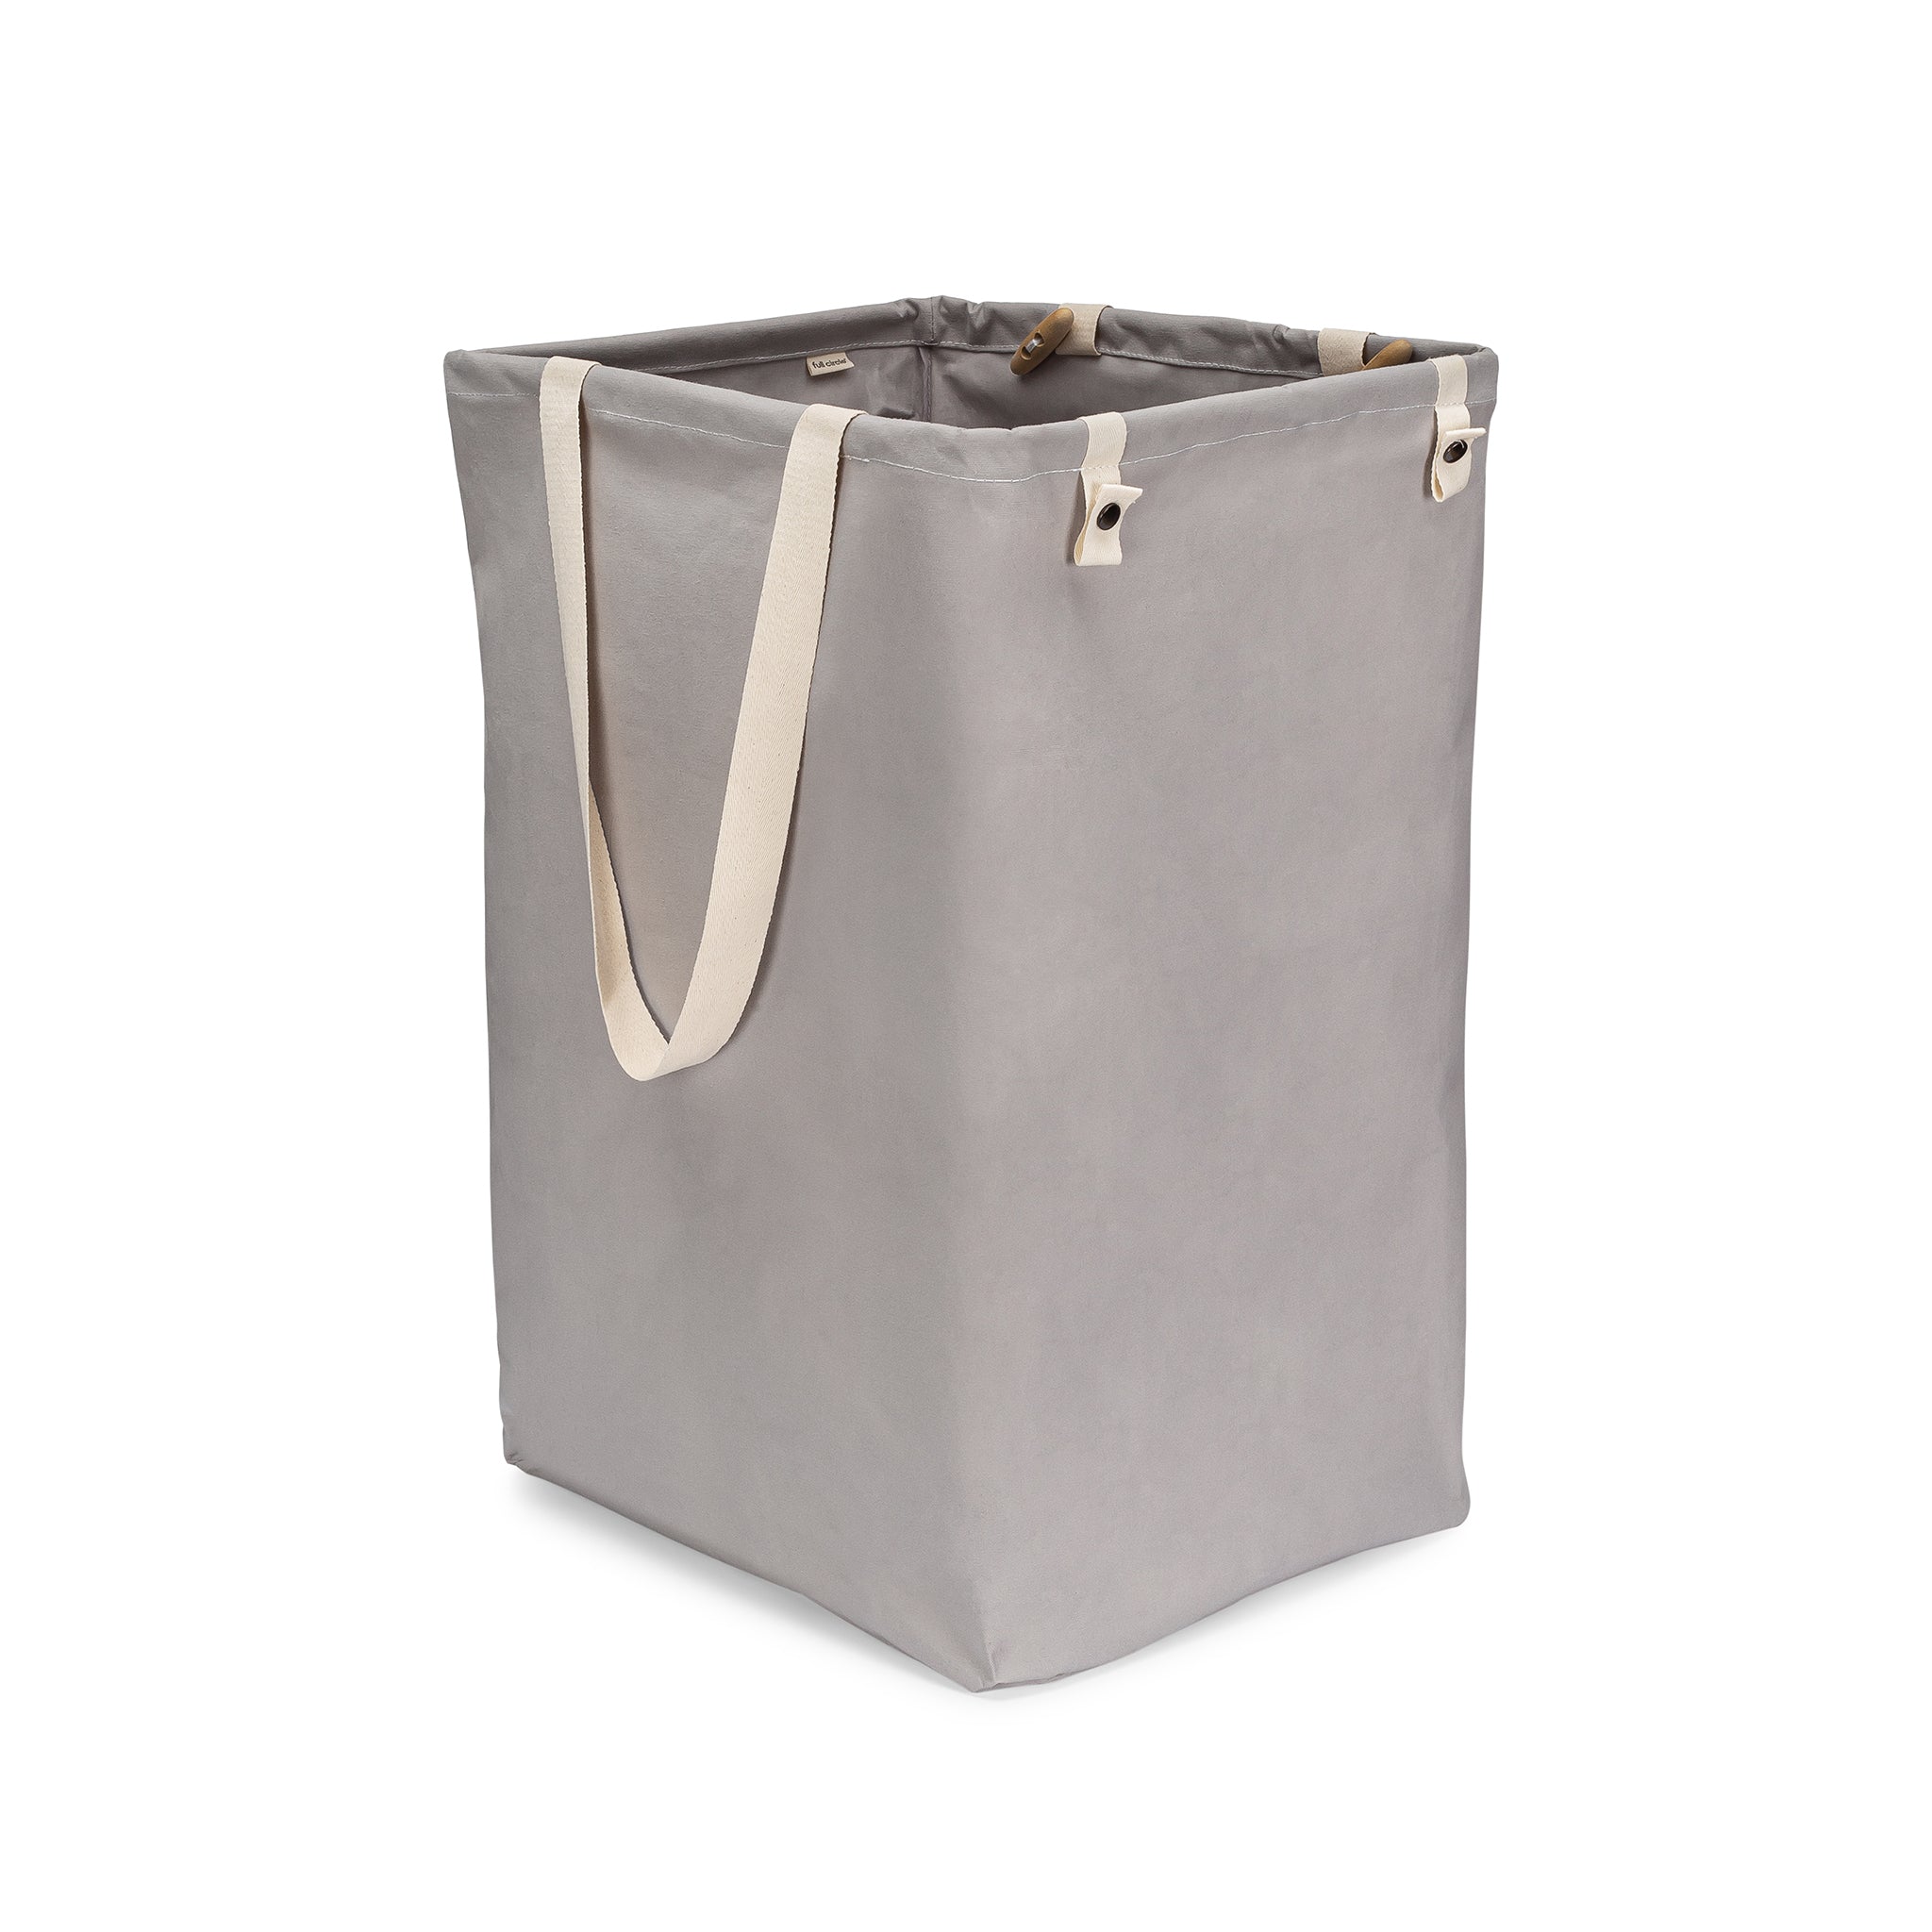 laundry tote bags